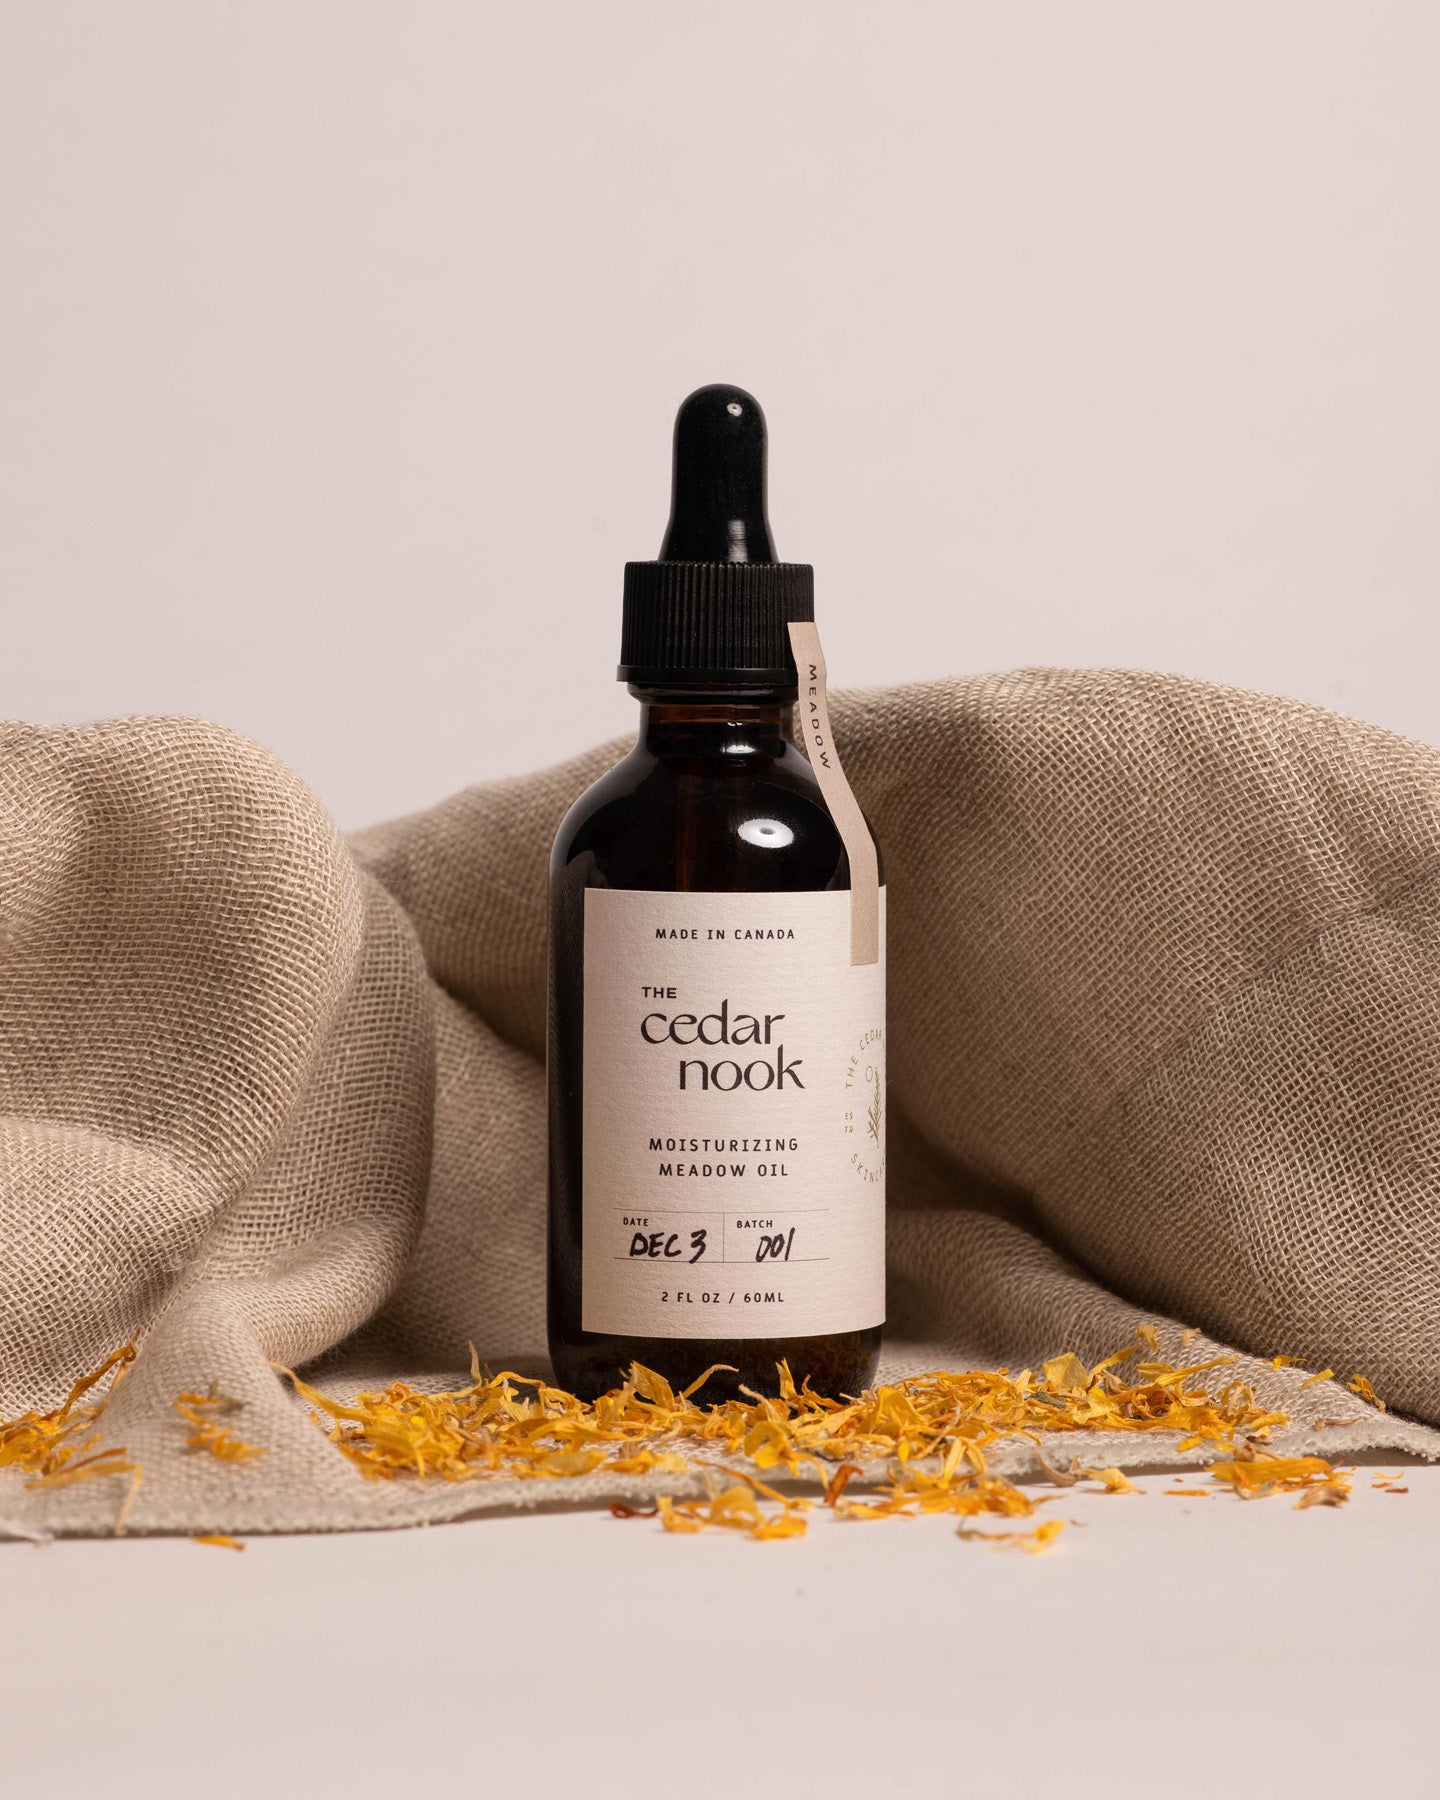 Moisturizing Meadow Oil | The Cedar Nook Face Oil in a 2 oz amber glass bottle with dropper top standing in front of a linen towel and dried calendula leaves